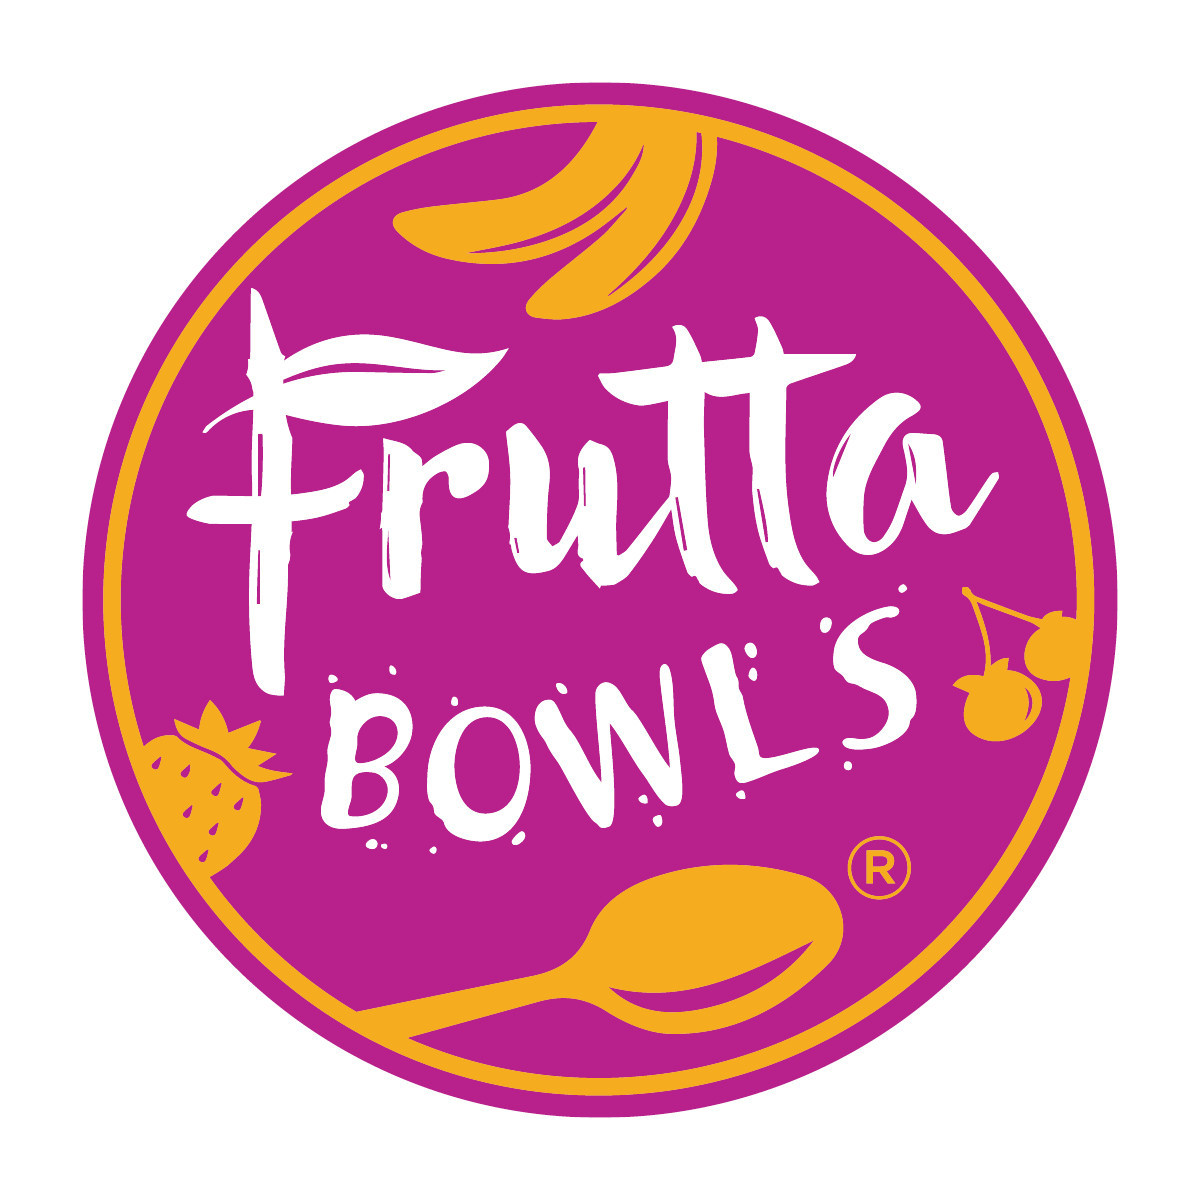 Local Frutta Bowls Raises $850 For No Kid Hungry to Help Provide Healthy Meals to Children